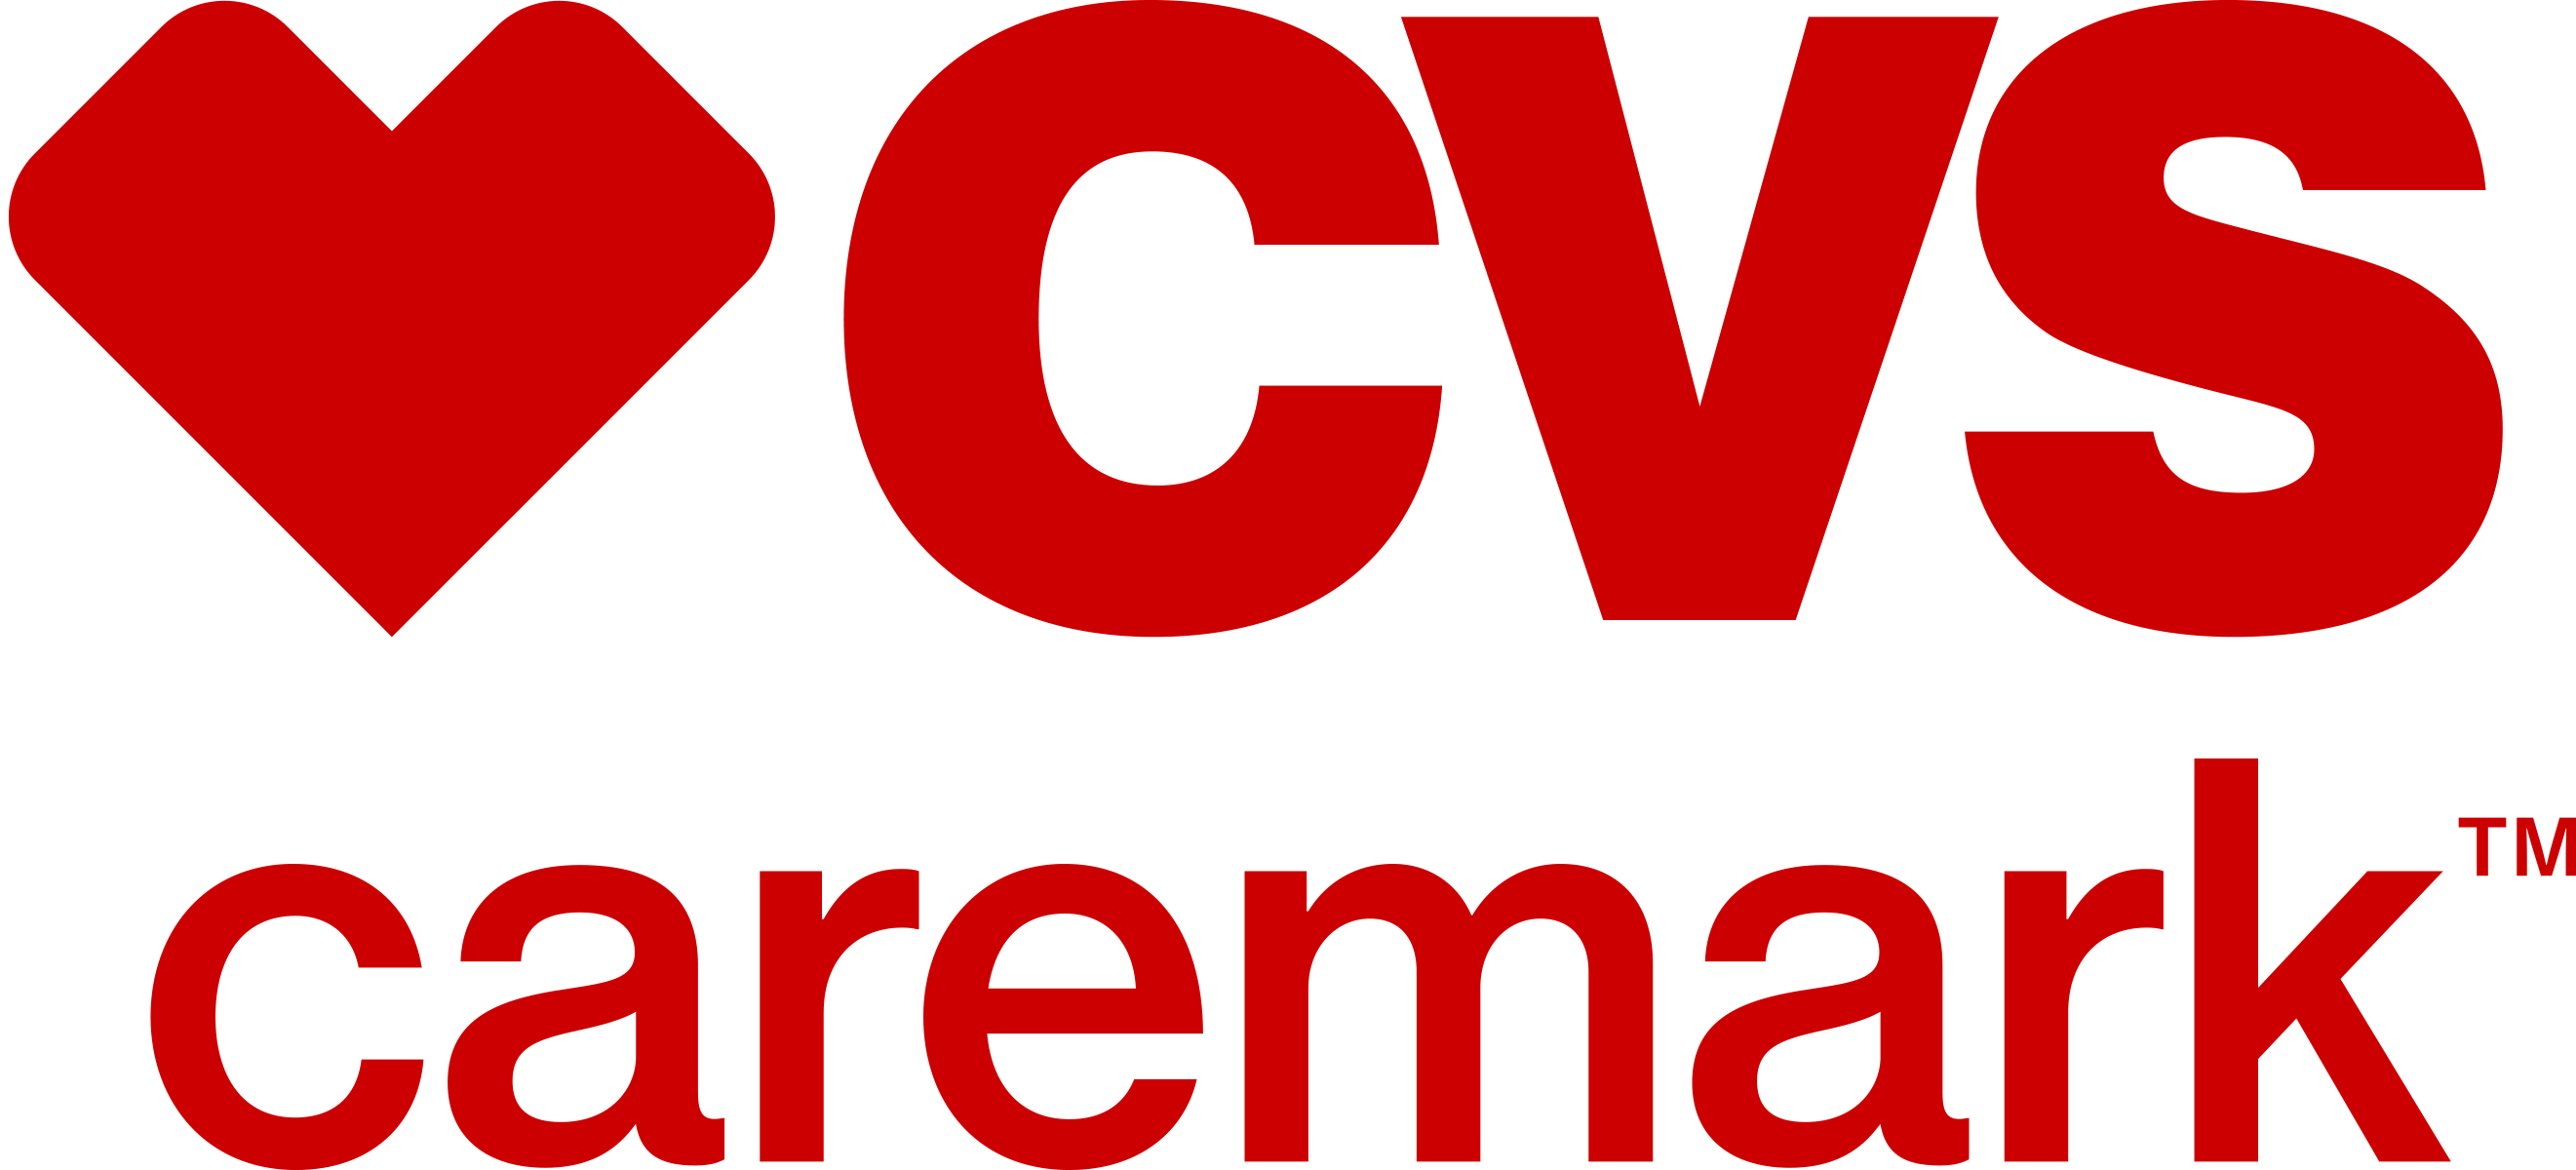 CVS Caremark Removes, Adds Products to Formulary